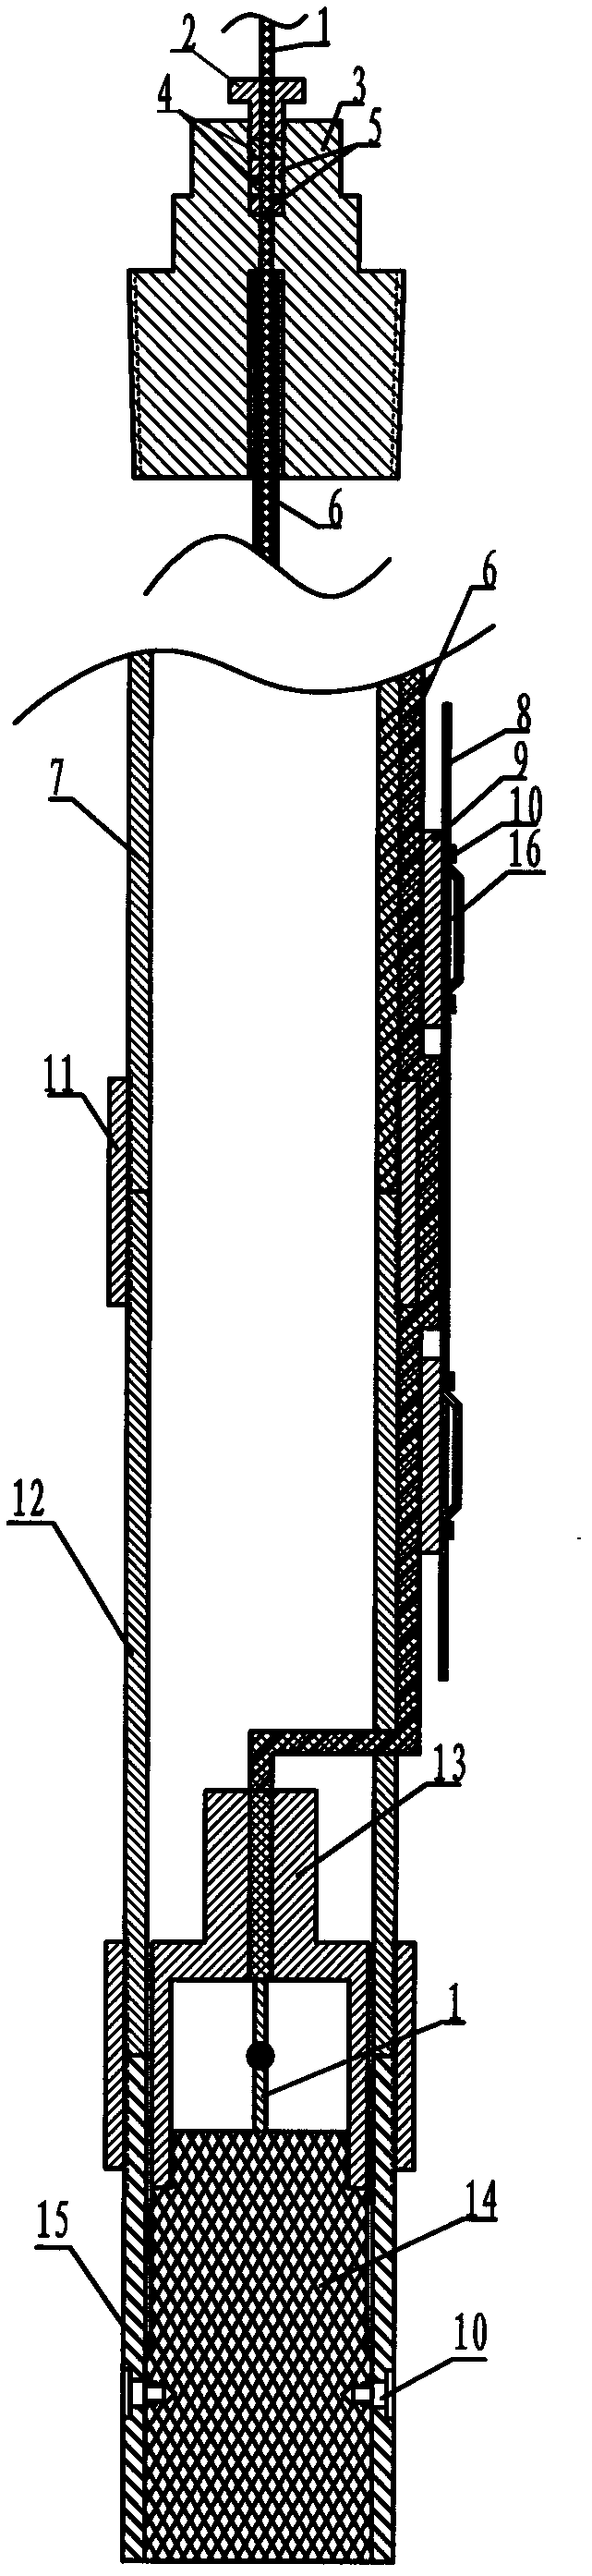 Signal transmission method for downhole measurement and control system